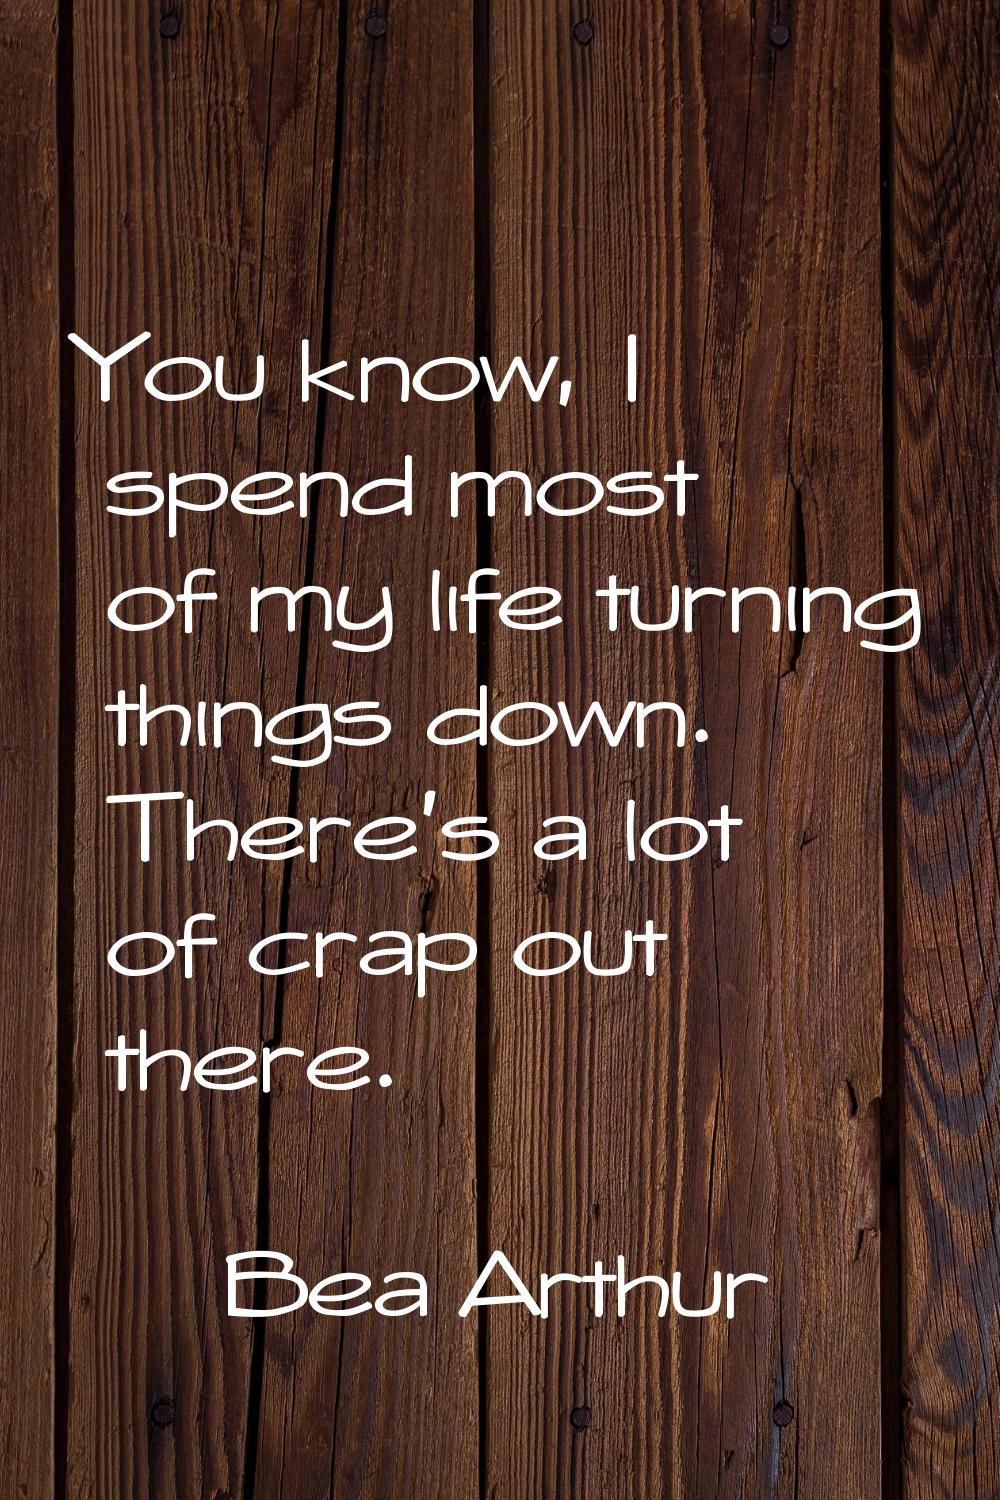 You know, I spend most of my life turning things down. There's a lot of crap out there.